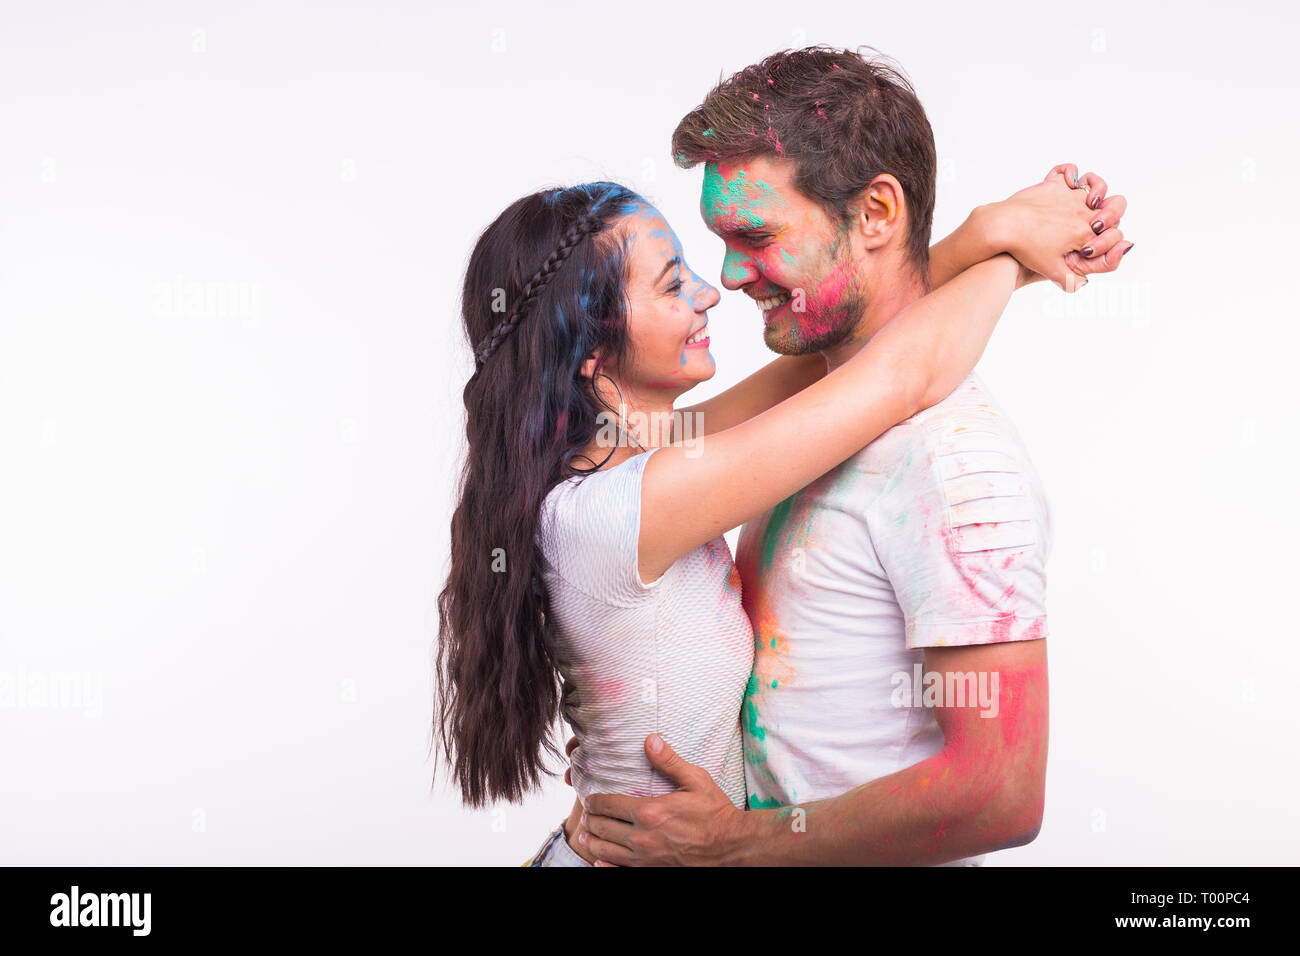 Friendship, love, festival of holi, people concept - young couple ...